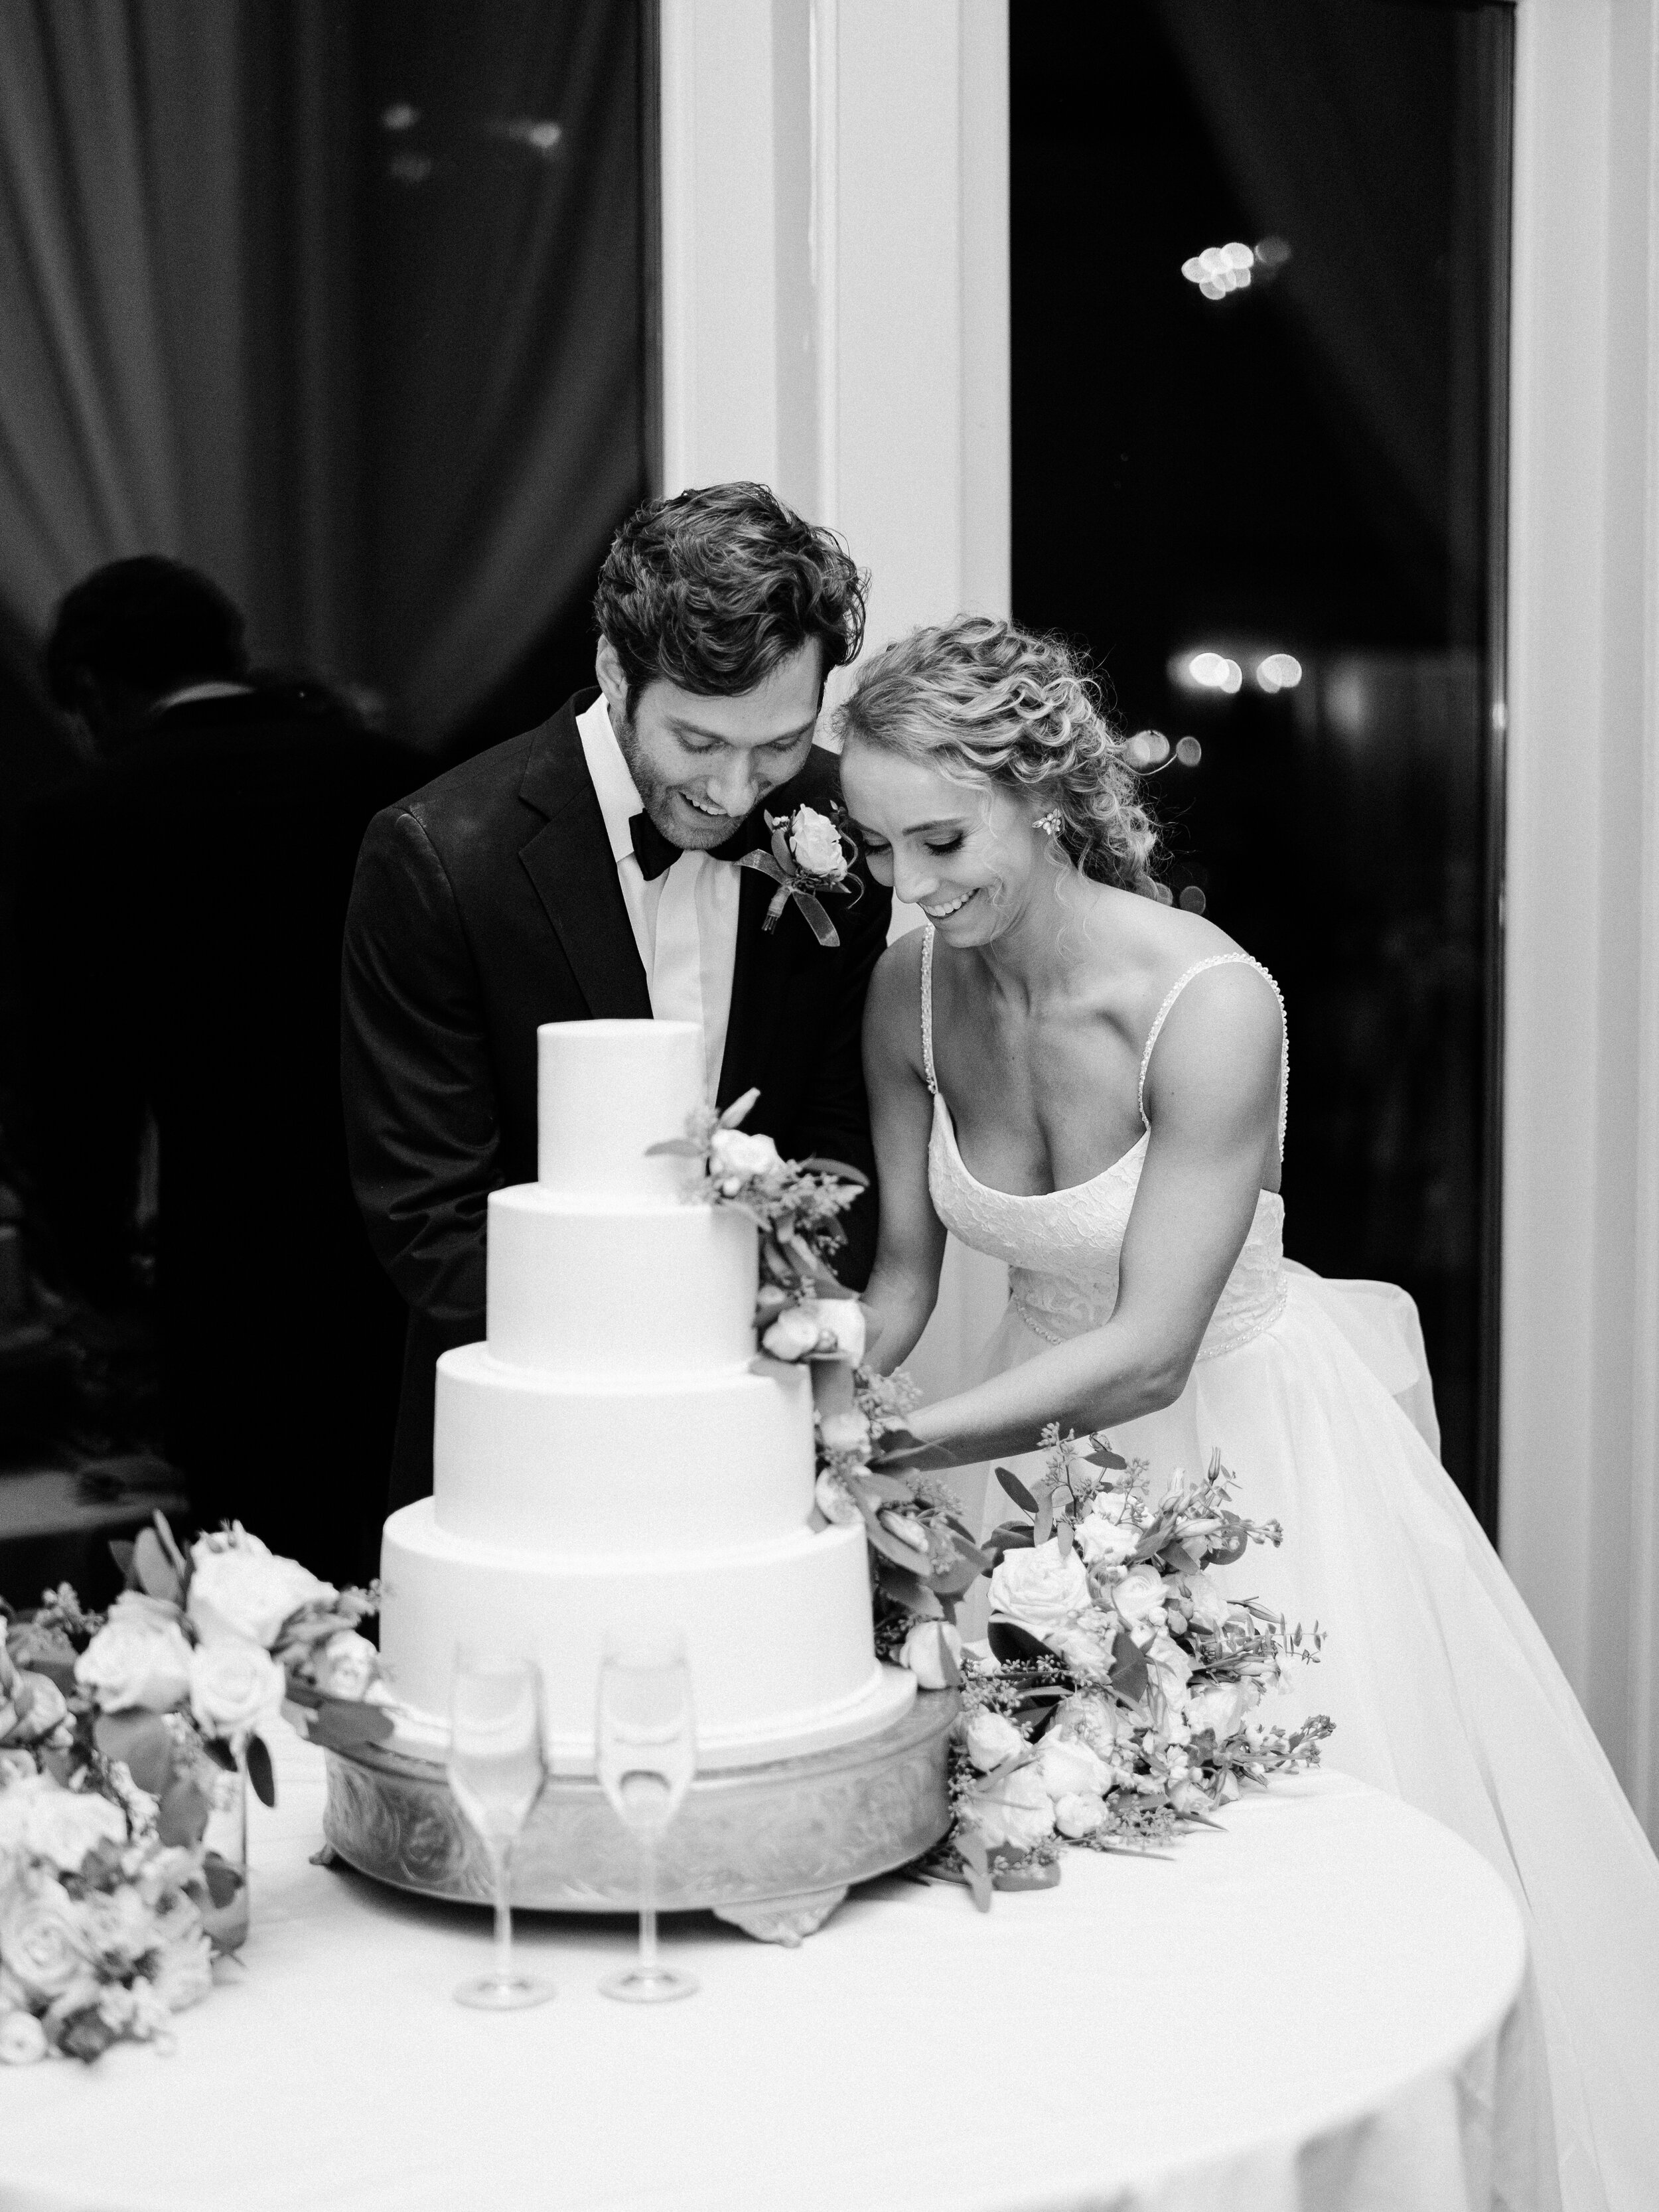 Bride and Groom Cutting the Cake | Simply Charming Socials  | Atlanta Wedding Planner